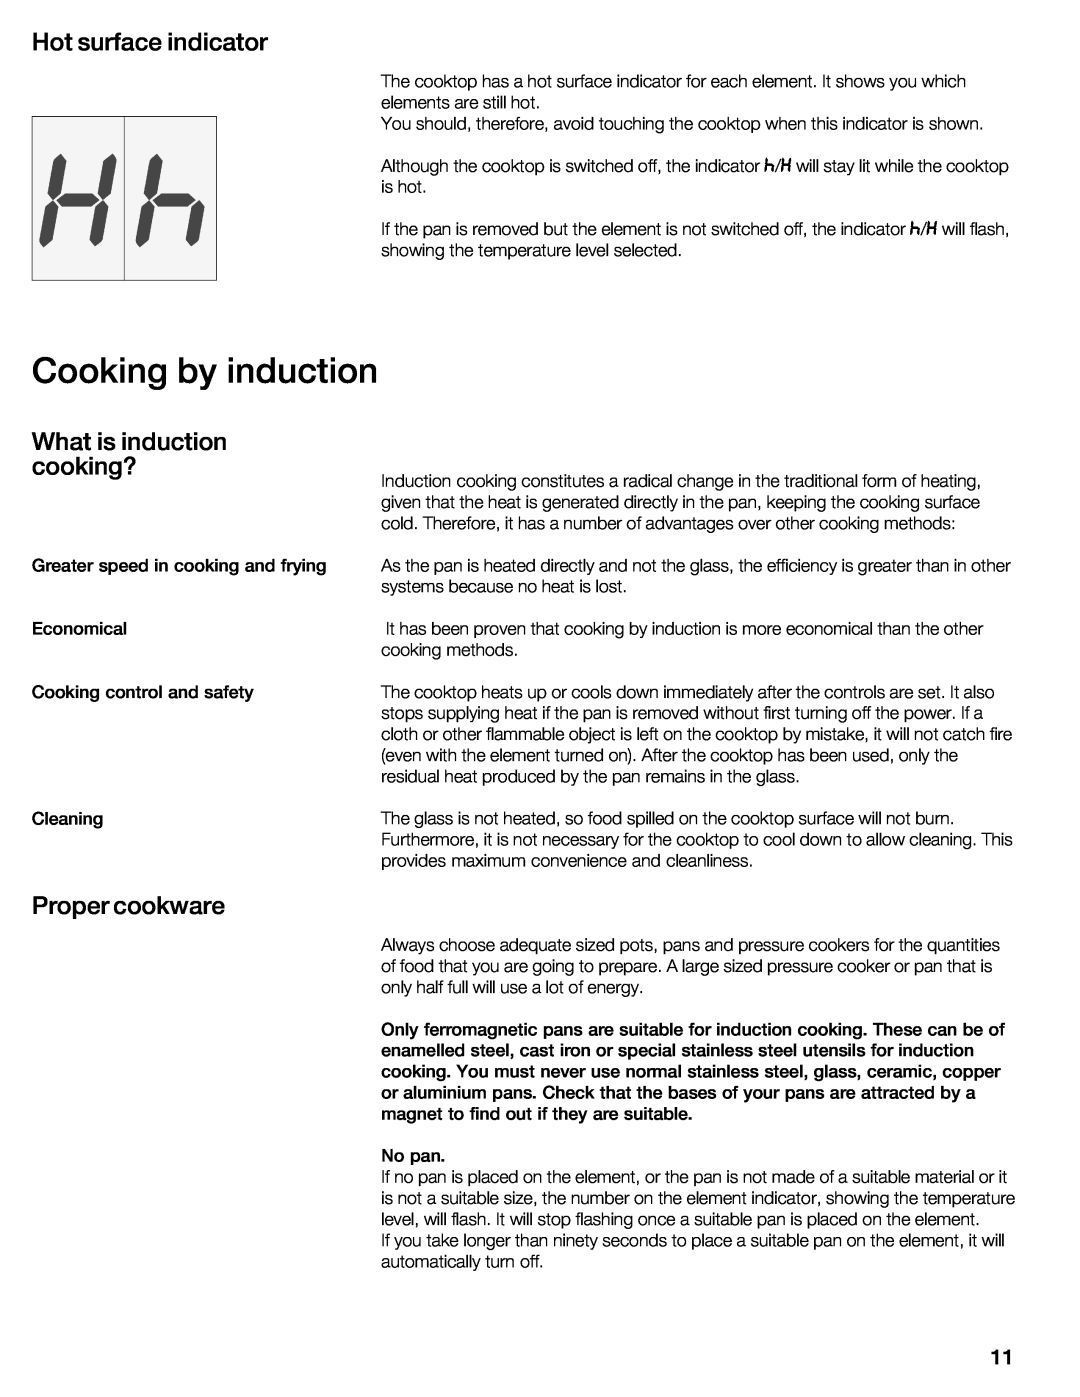 Bosch Appliances NIT8053UC manual Cooking by induction, Hot surface indicator, What is induction cooking?, Proper, cookware 